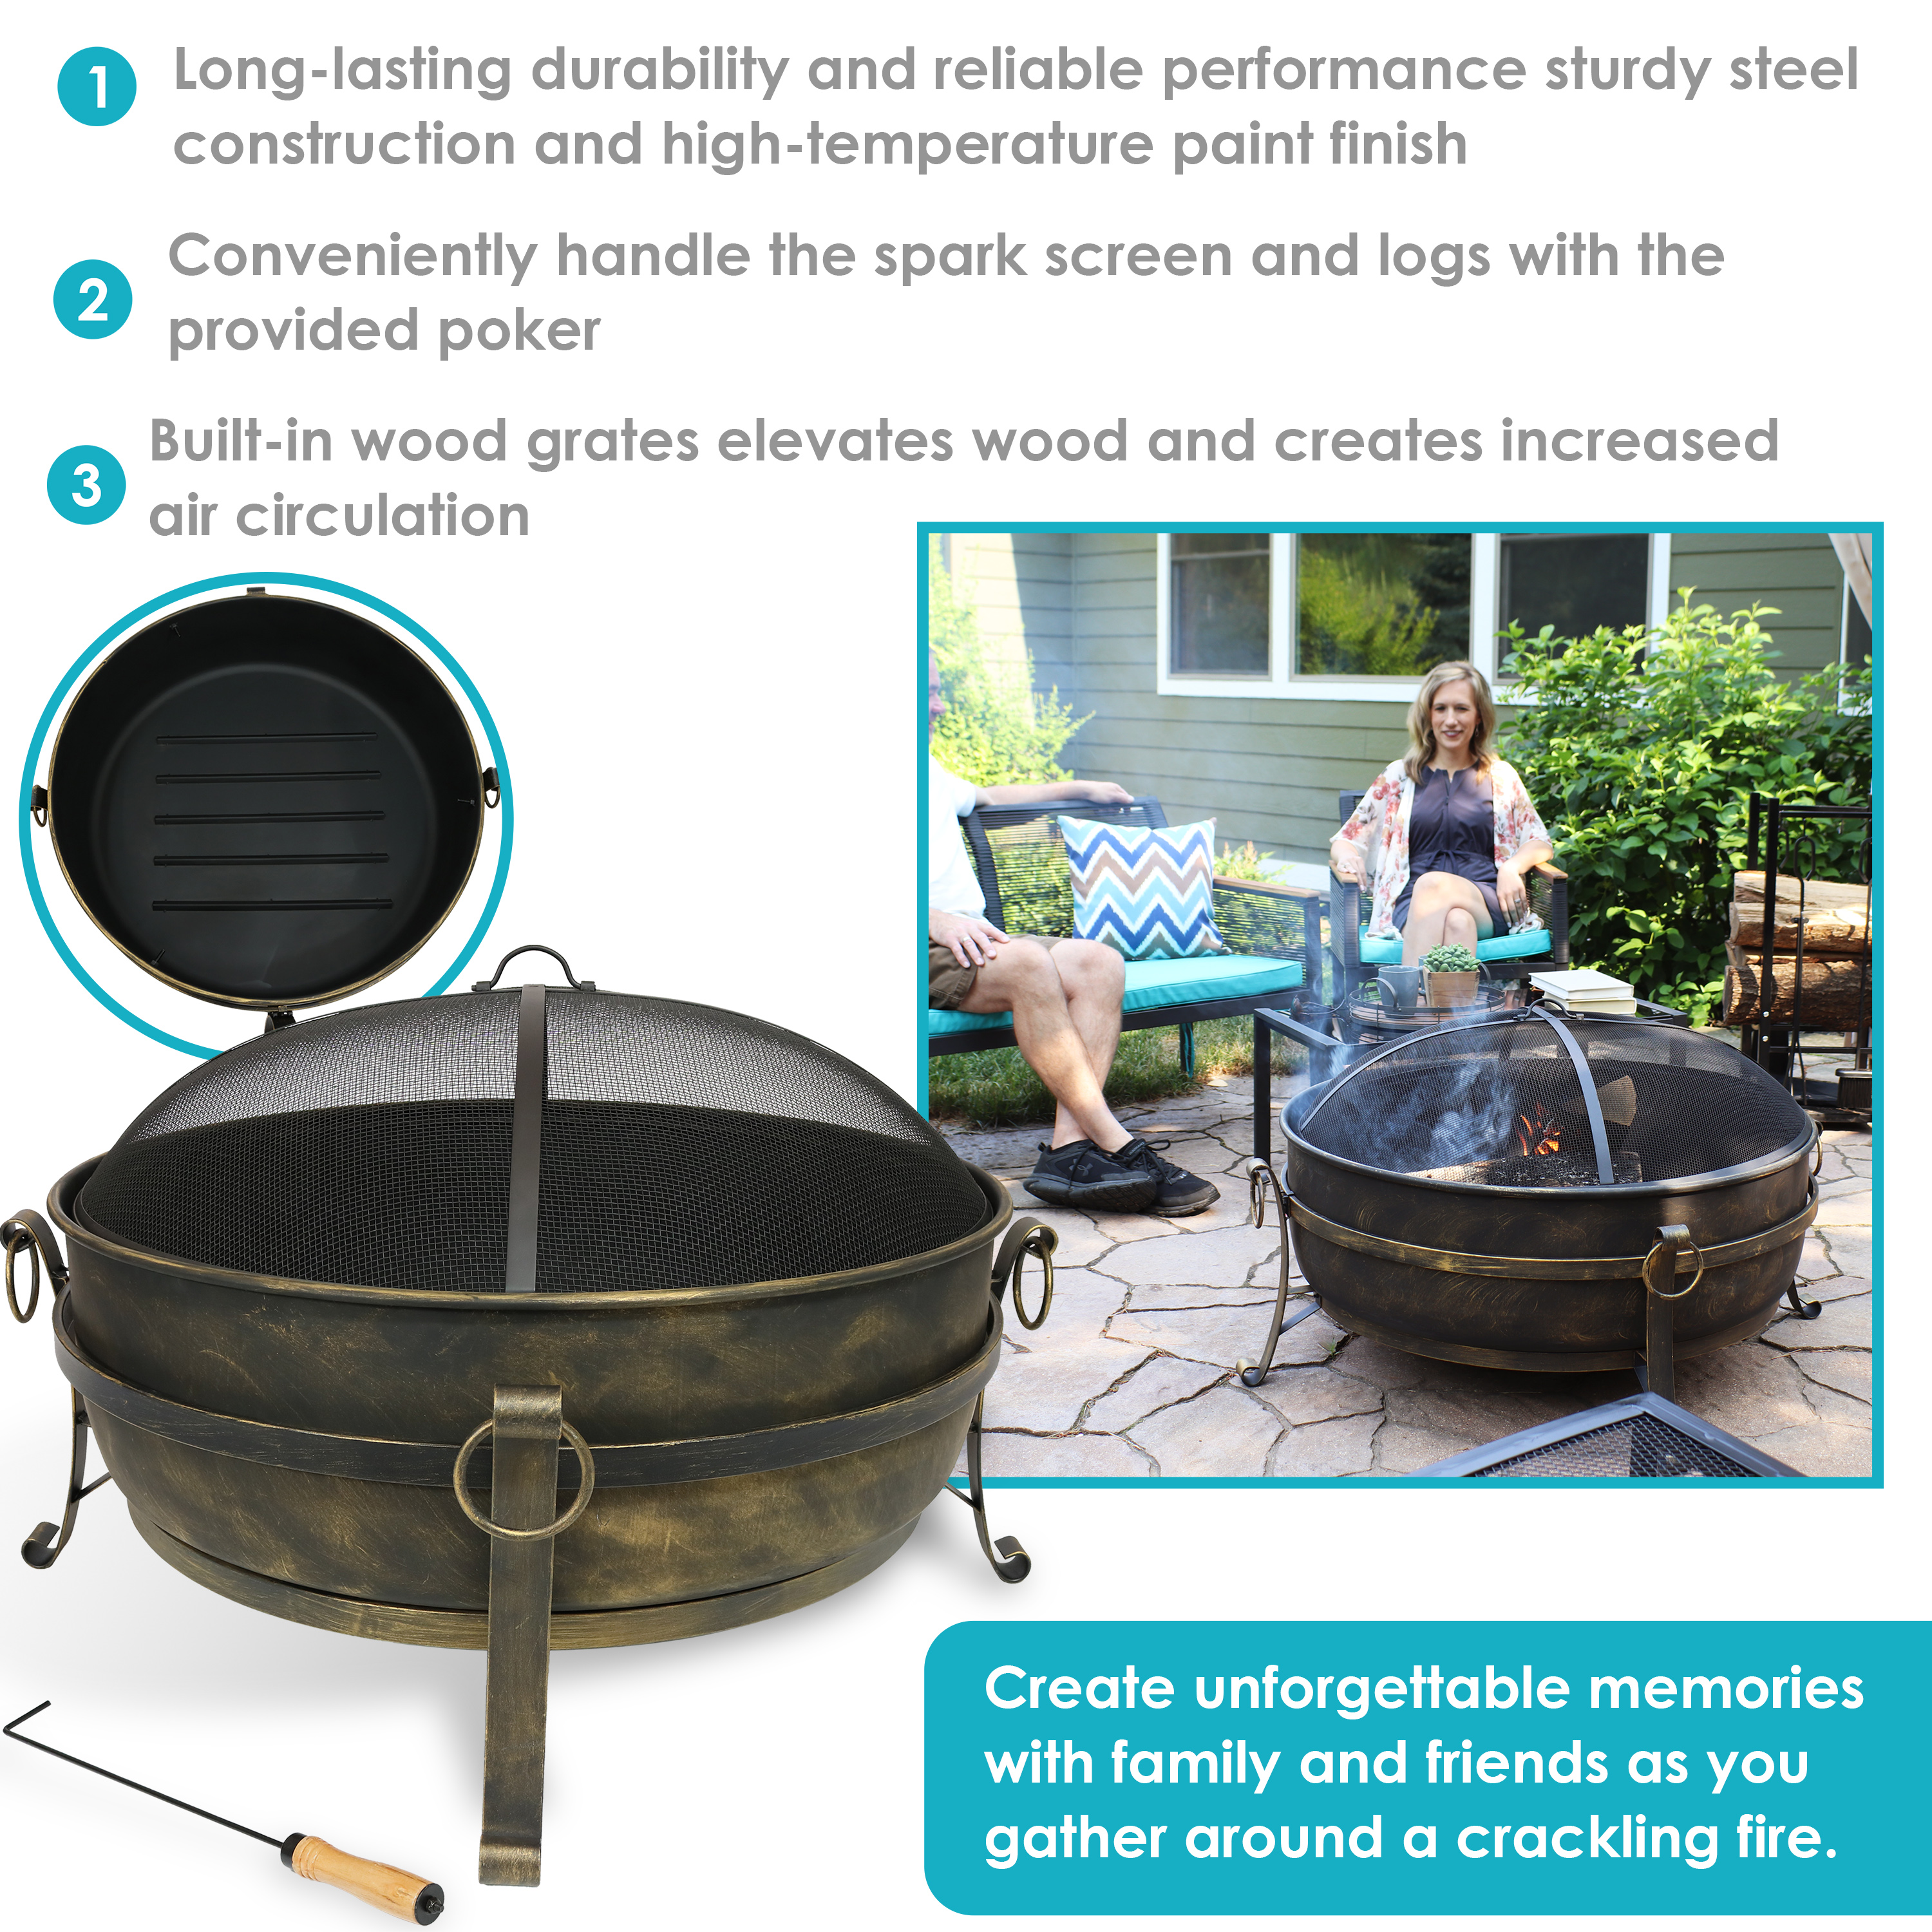 Sunnydaze Large Outdoor Cauldron Fire Pit with Spark Screen - 34" - image 4 of 9